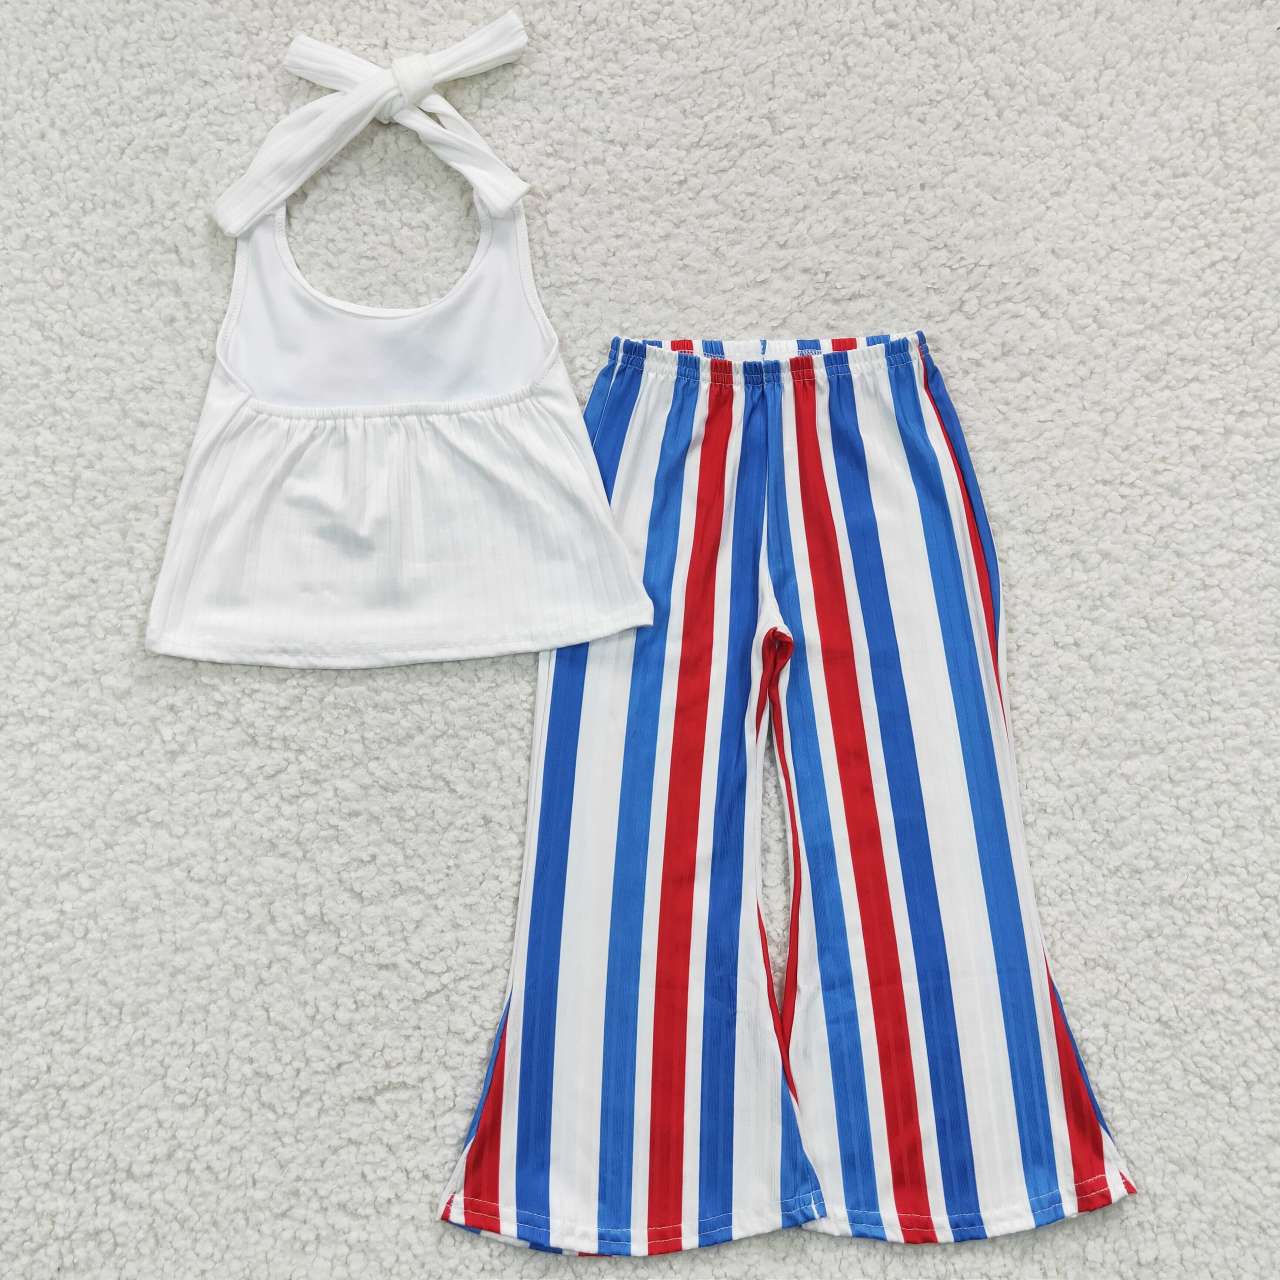 GSPO0655 July 4th baby girls outfit